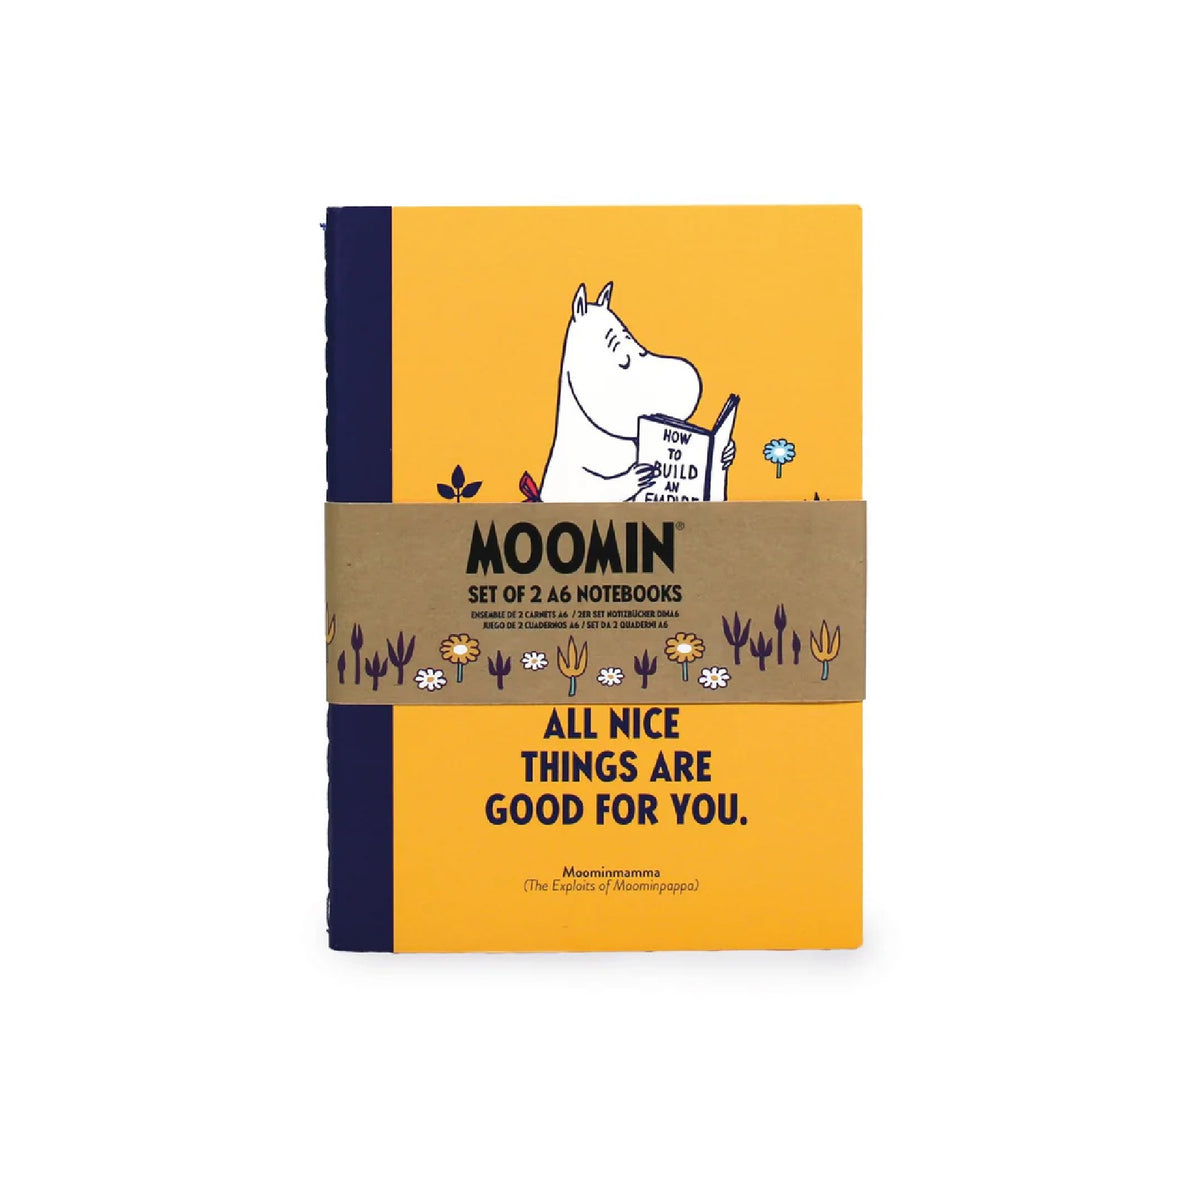 A6 Moomin Notebooks Set of 2